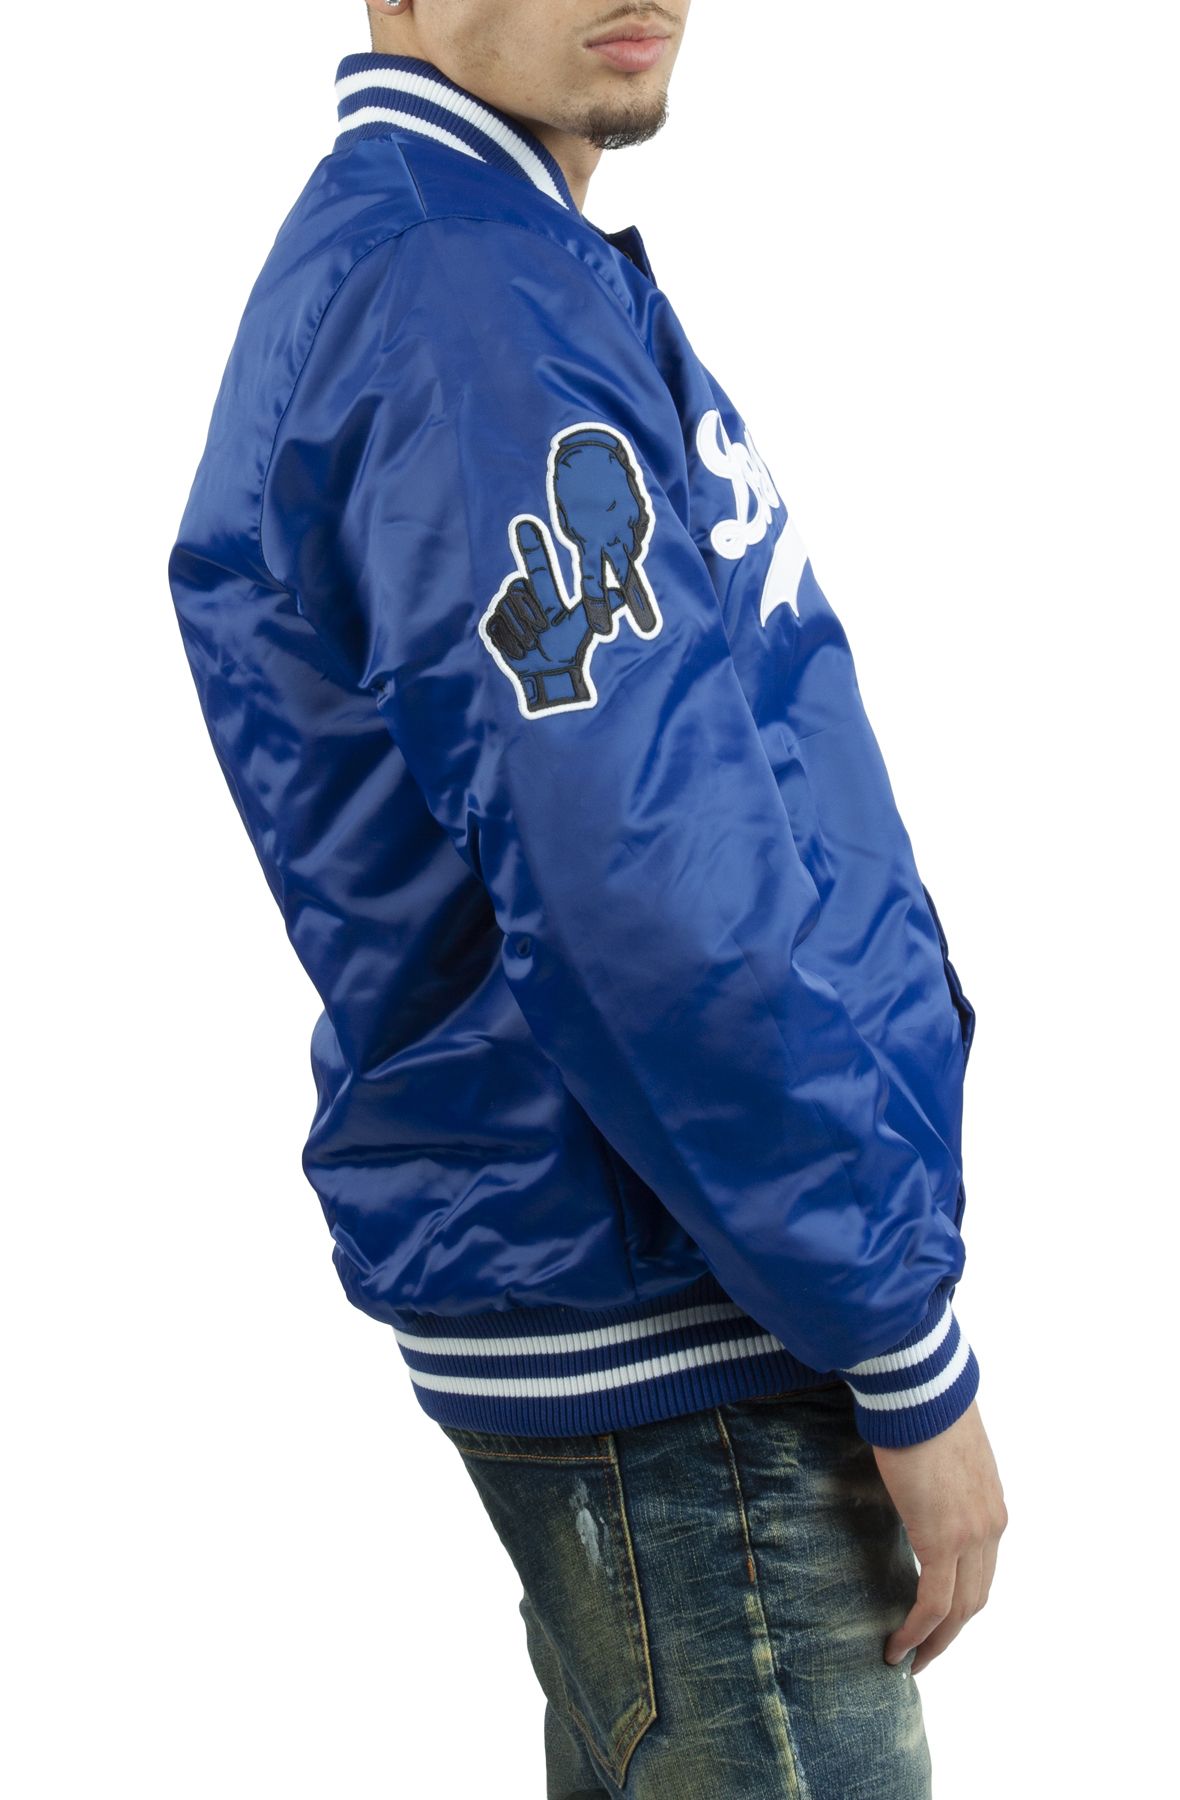 Blue and Black/Blue and White All-Star Los Angeles Dodgers Jacket - Jackets  Expert